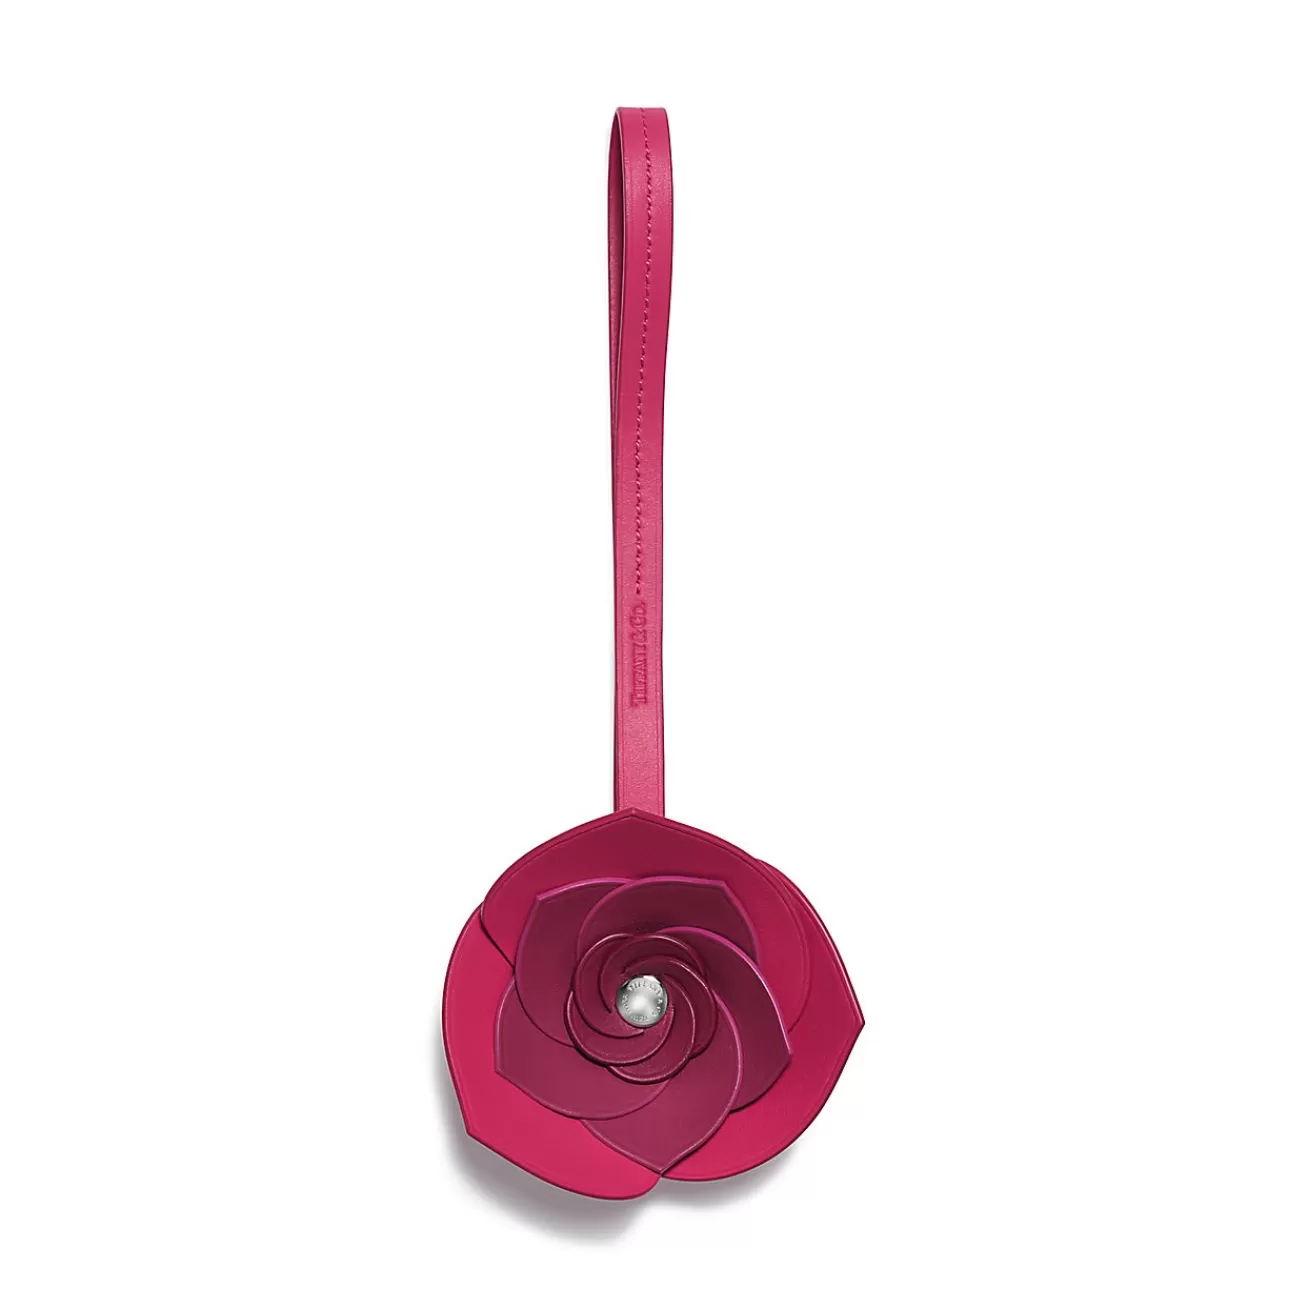 Tiffany & Co. ® Flower Bag Charm in Fuchsia Leather | ^Women Small Leather Goods | Women's Accessories